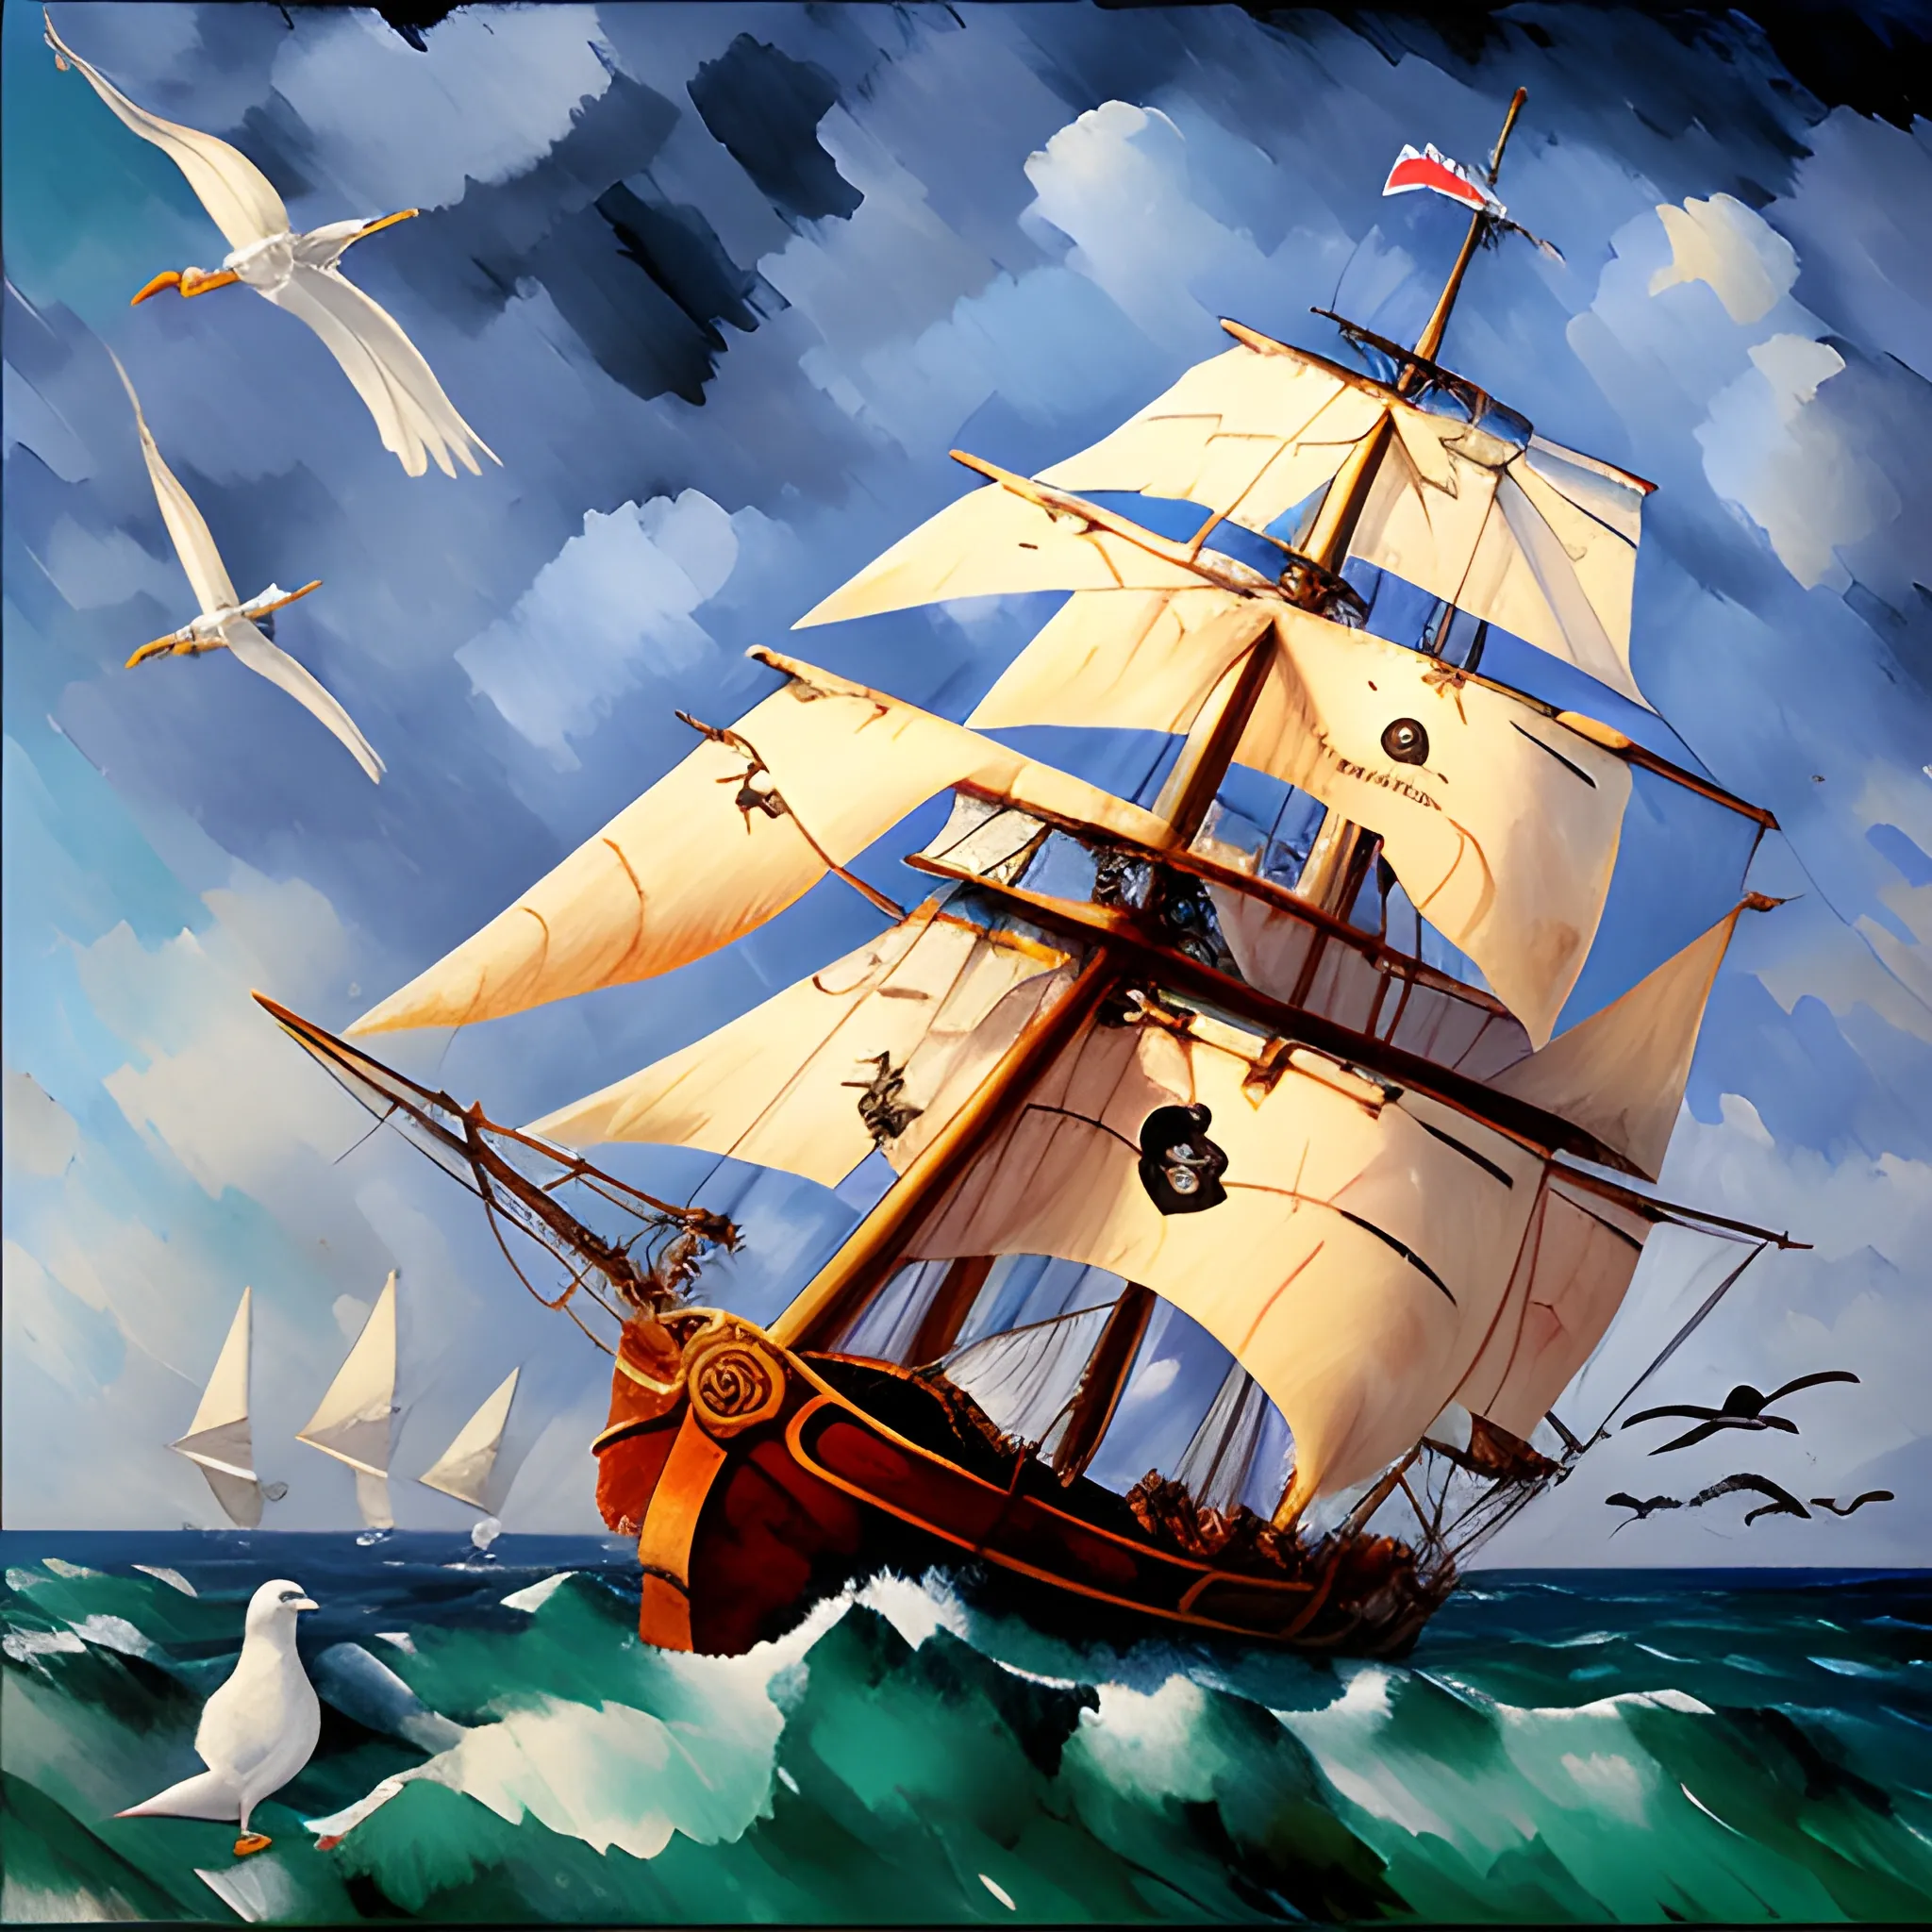 A large pirate ship sailing with sails blown in the wind, open sea, clear sky, seagulls, side view, Rule of Thirds, art Jem, oil painting, visible brush strokes, deep colors, Paul Cezanne style